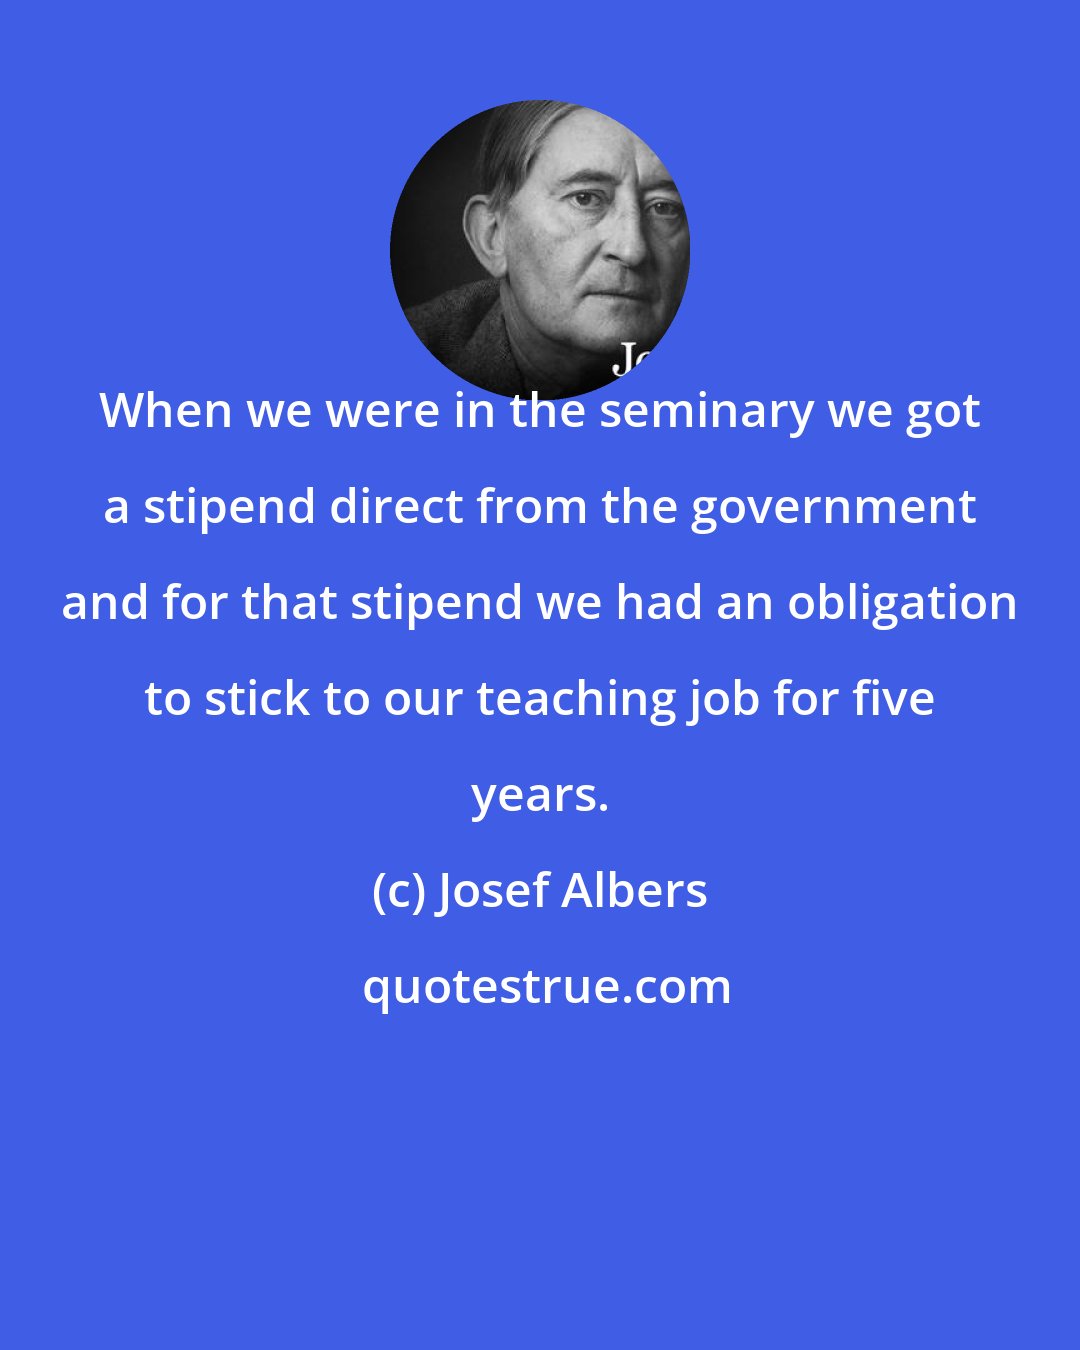 Josef Albers: When we were in the seminary we got a stipend direct from the government and for that stipend we had an obligation to stick to our teaching job for five years.